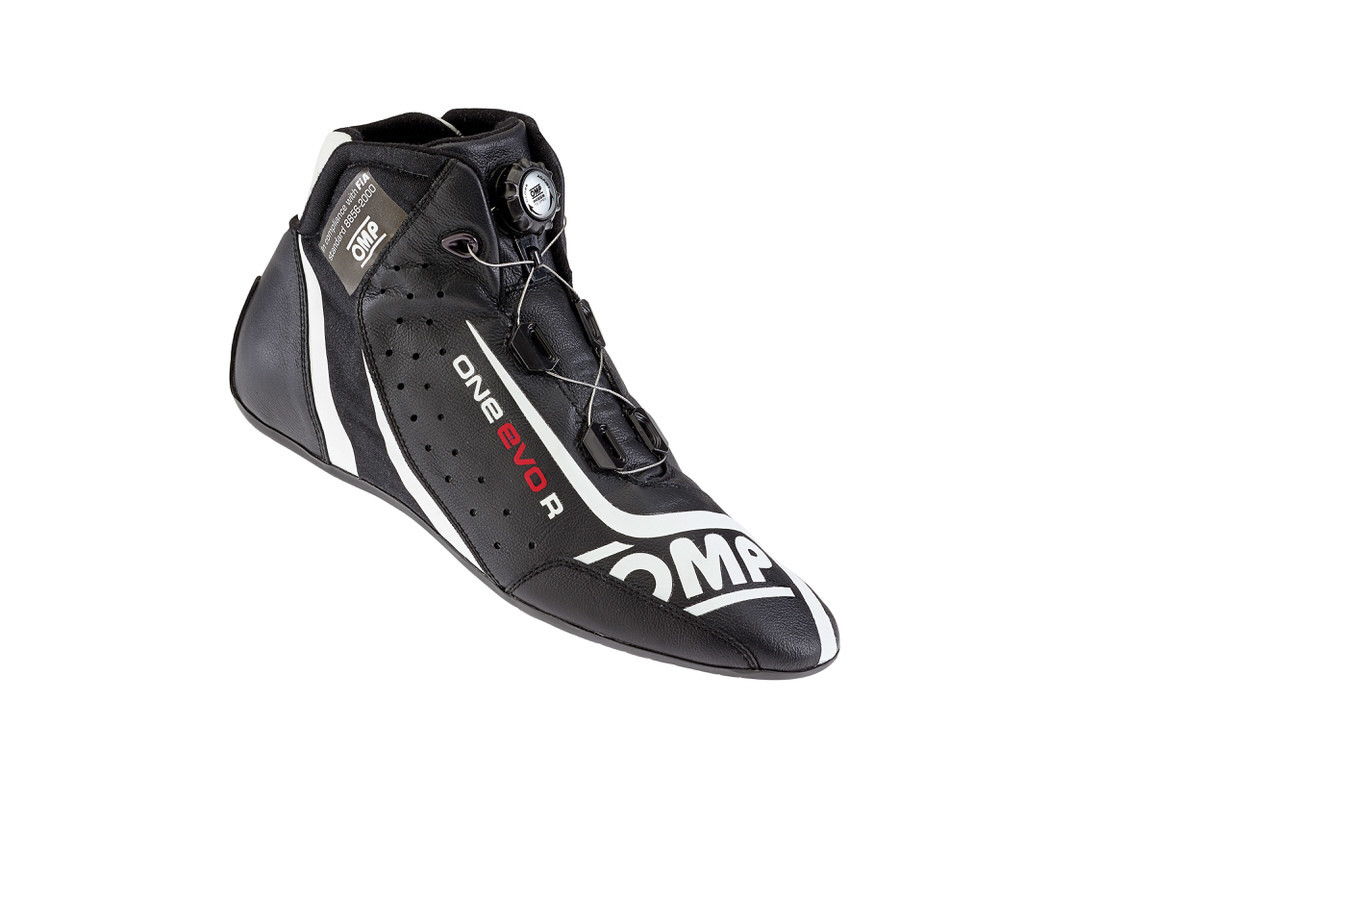 OMP Racing IC80507141 - Shoe, One Evo R, Driving, Mid Top, FIA Approved, Leather Outer, Fire Retardant Fabric Inner, Black, Euro Size 41, Pair